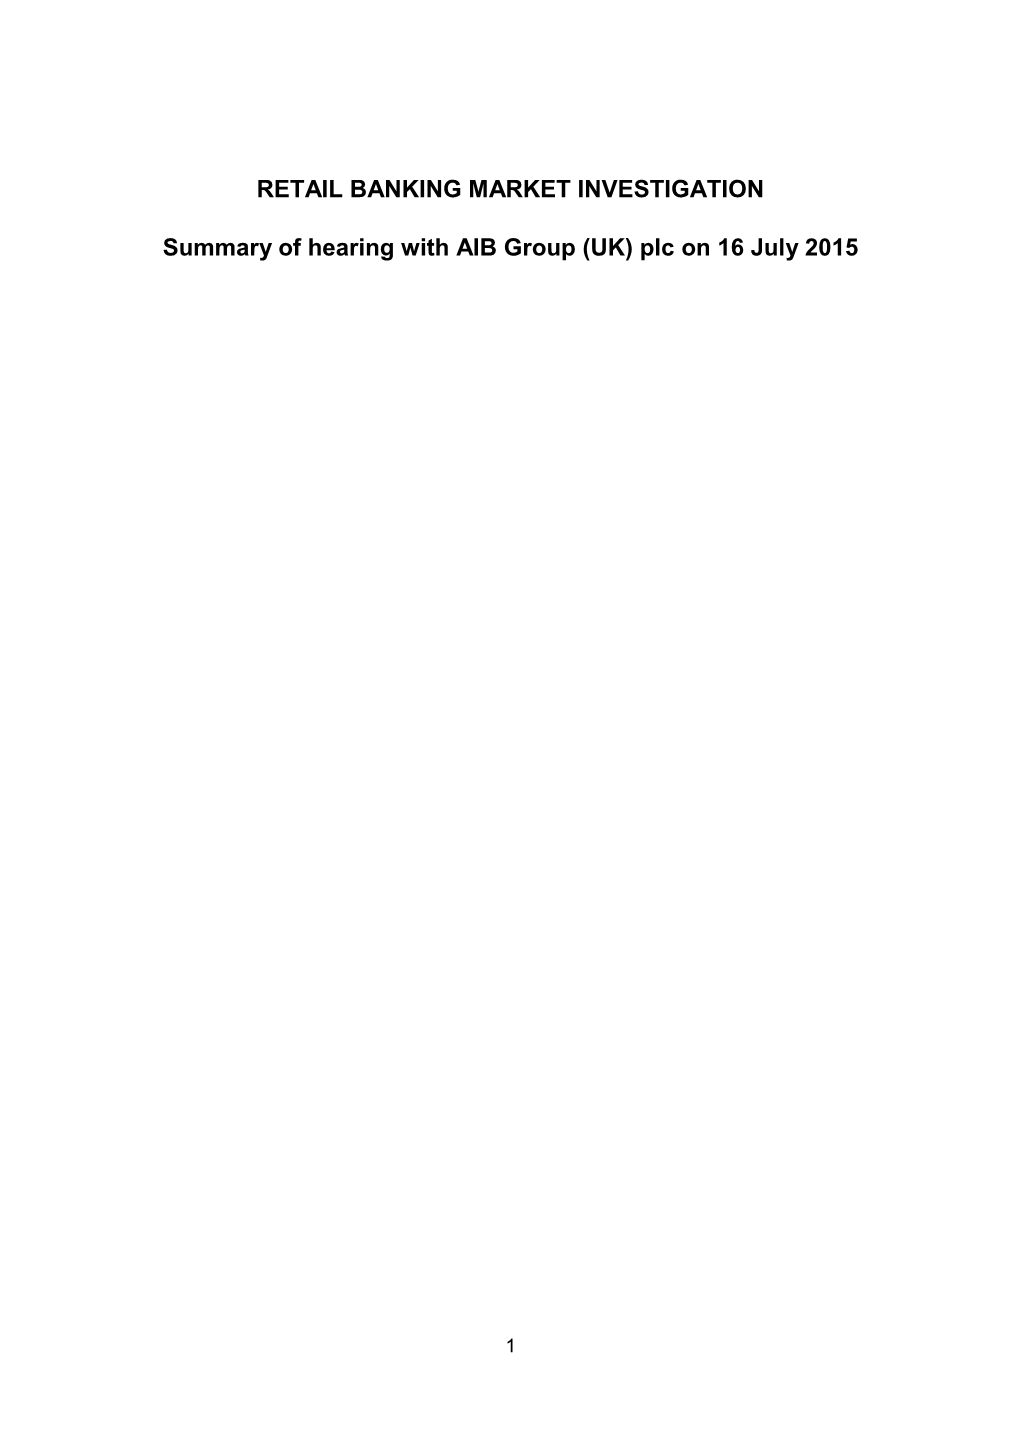 Retail Banking: Summary of Hearing with AIB on 16 July 2015